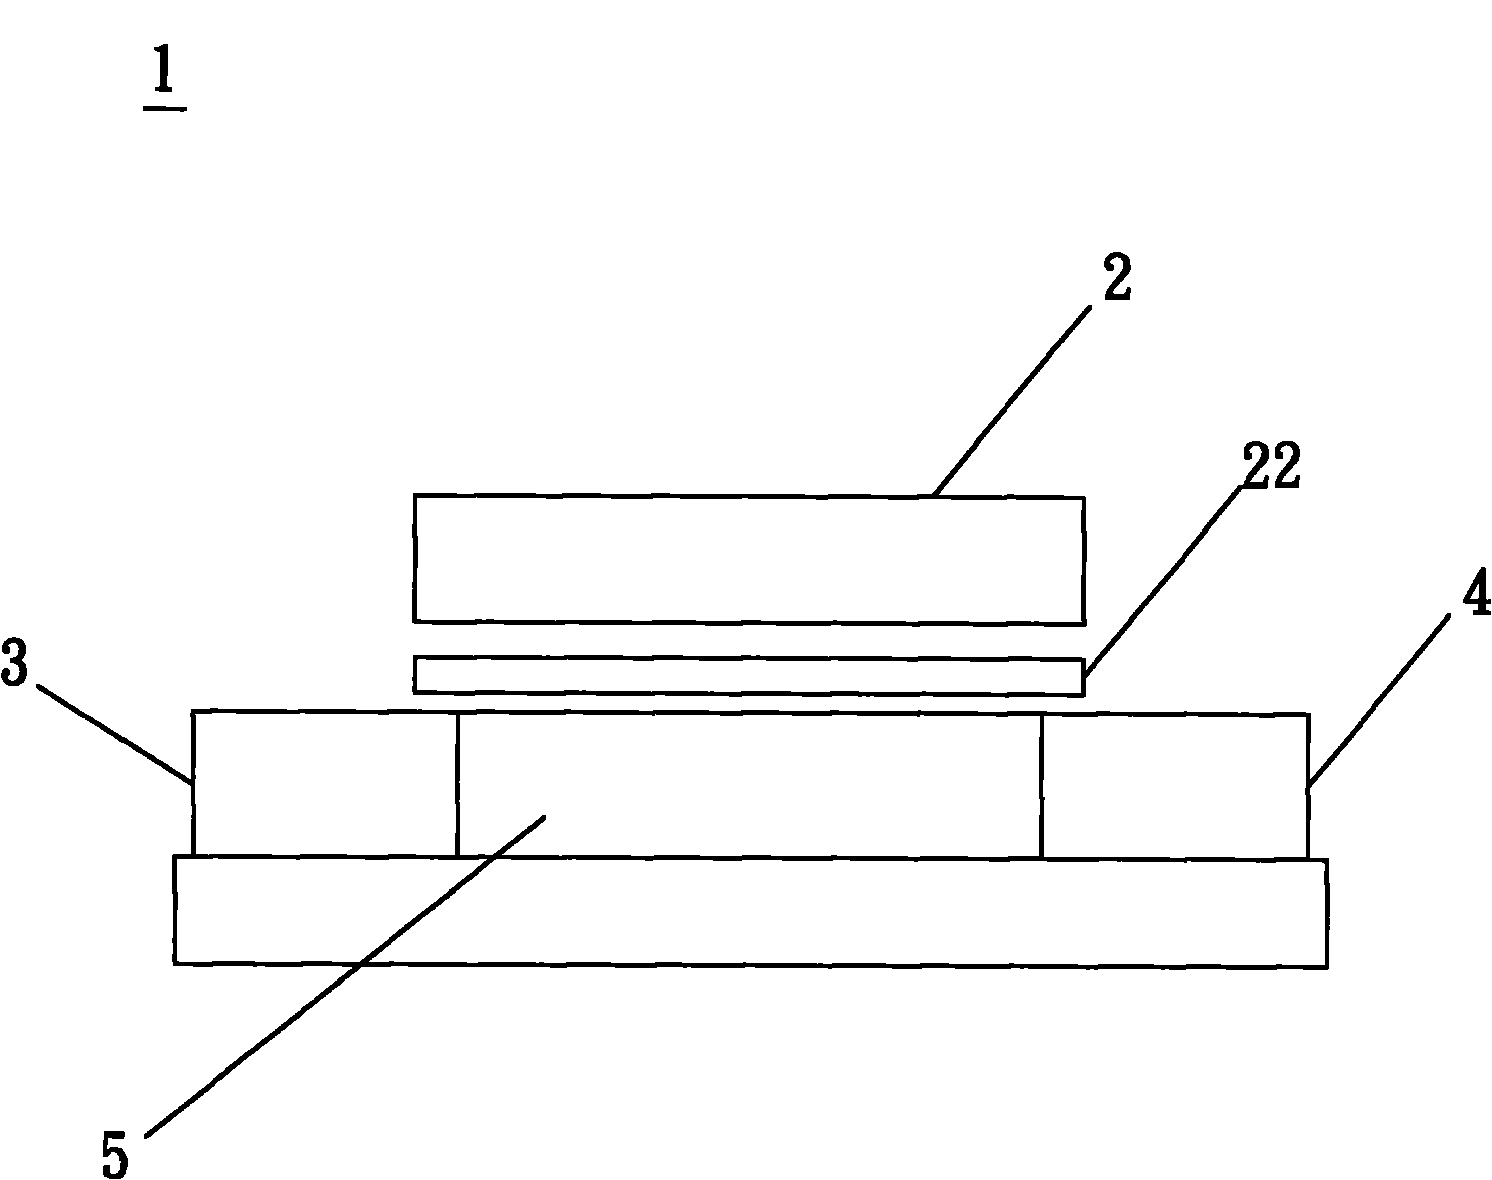 Method for enabling SONOS (Silicon Oxide Nitride Oxide Semiconductor) transistor to double as switch and memory